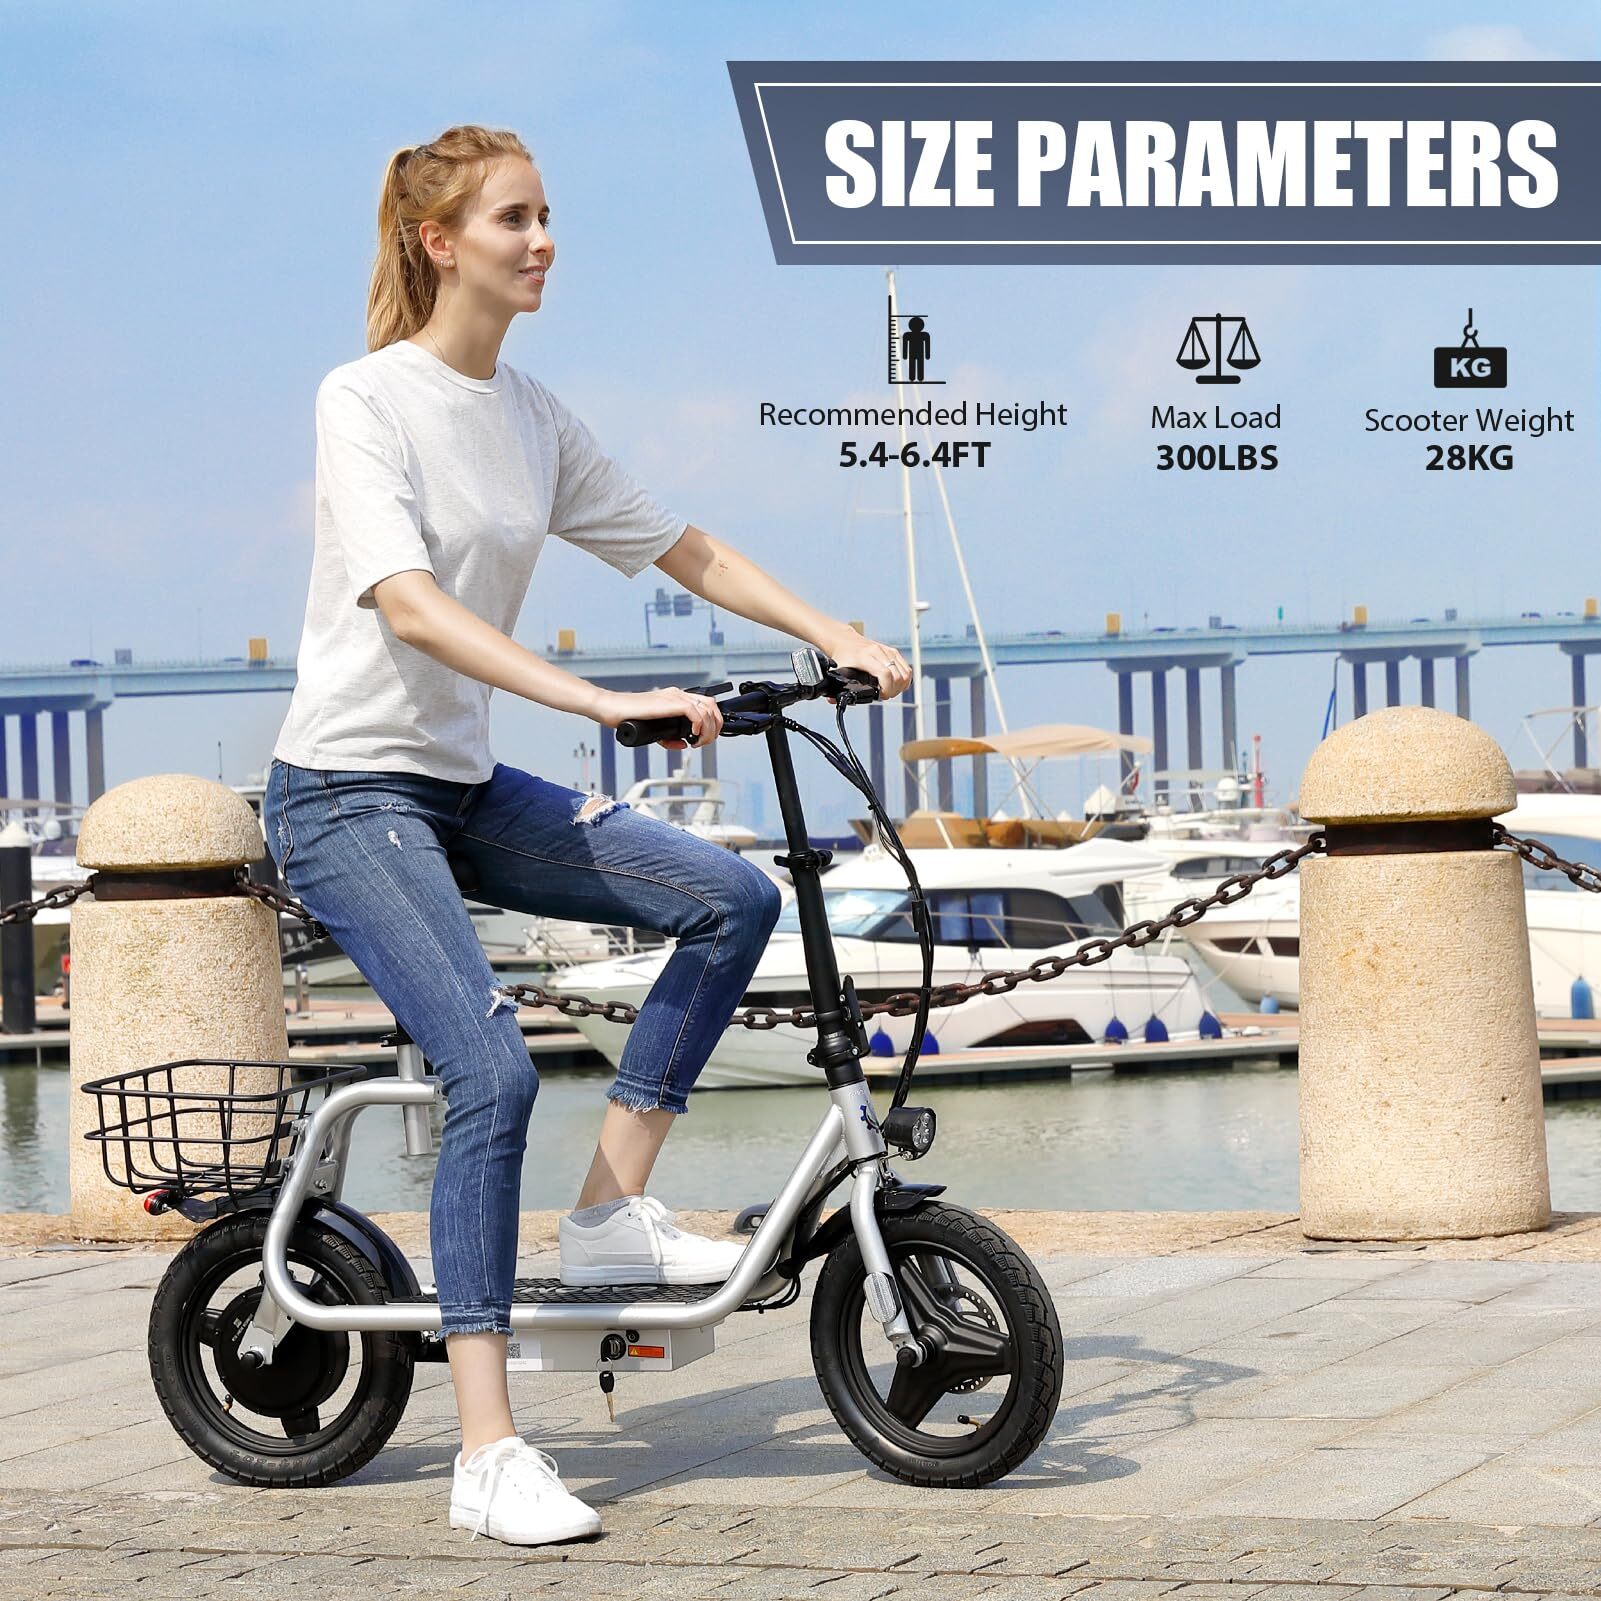 Caroma 800W(Peak) Adults Electric Scooter with Removable Seat, Max Speed 20mph Up to 25 Miles Range, 14" Tire for Commuting Scooter with Basket, Folding Electric Scooter, Silver - image 4 of 9